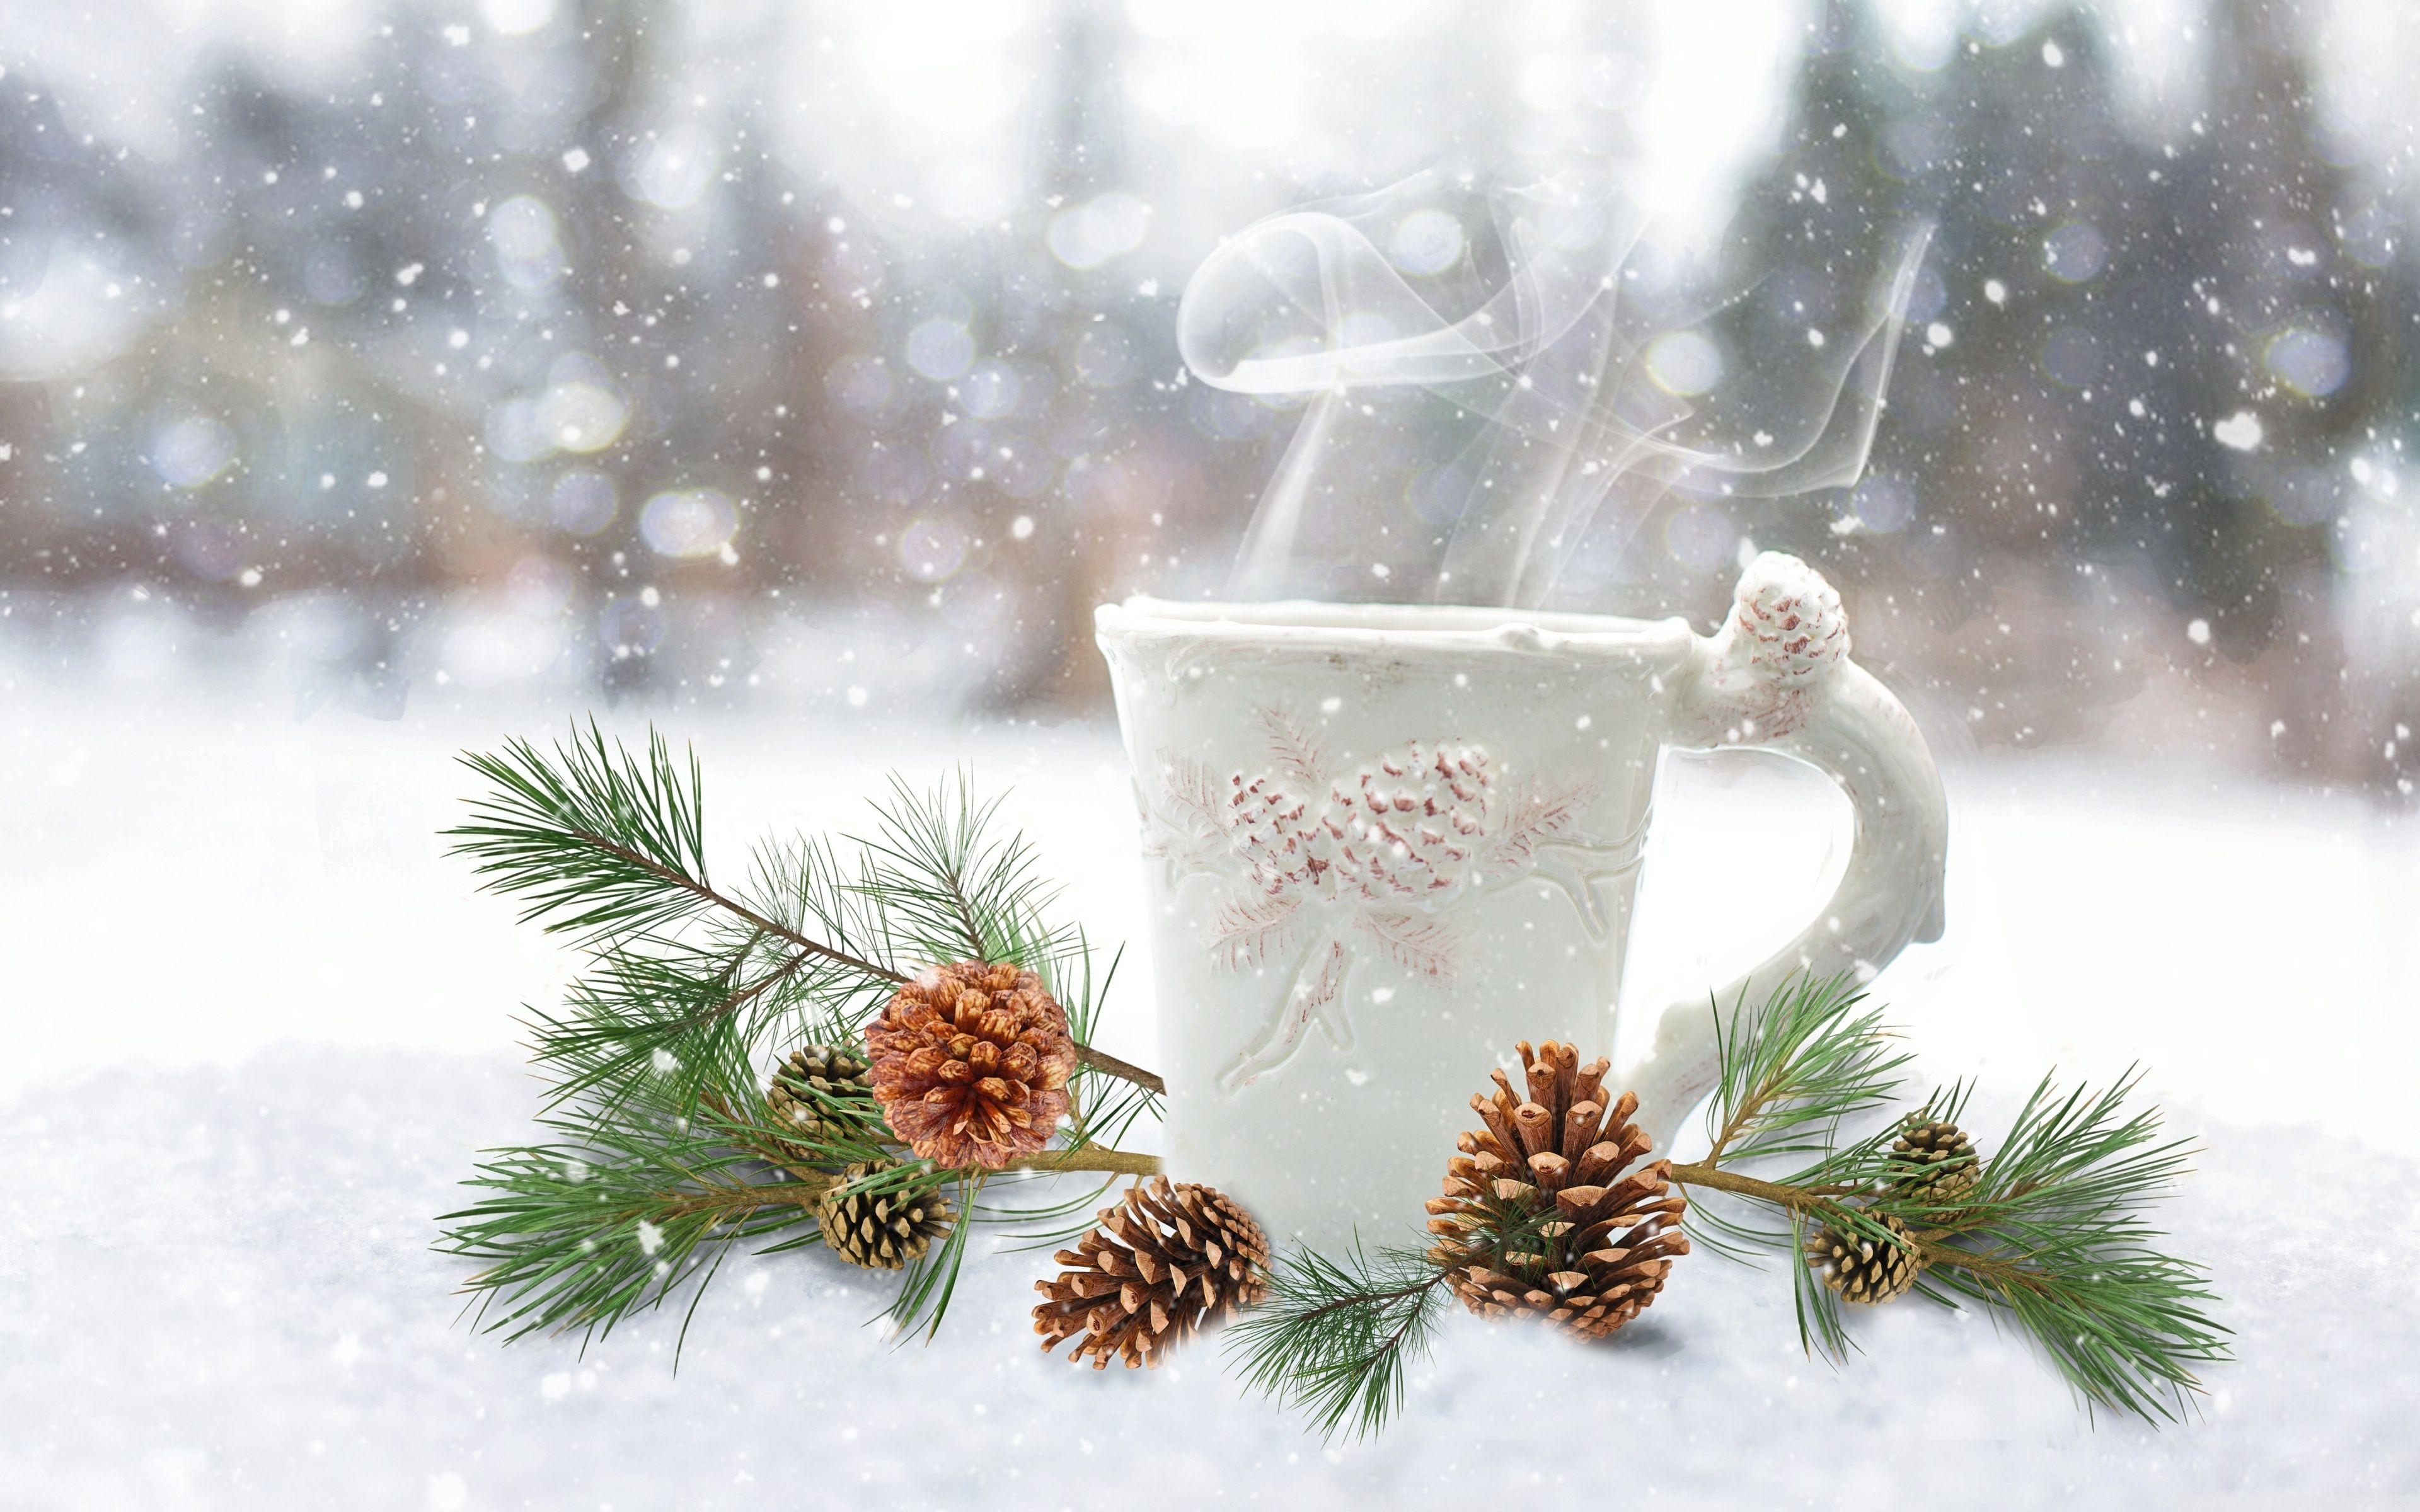 Cozy Winter Stock Photos and Images  123RF